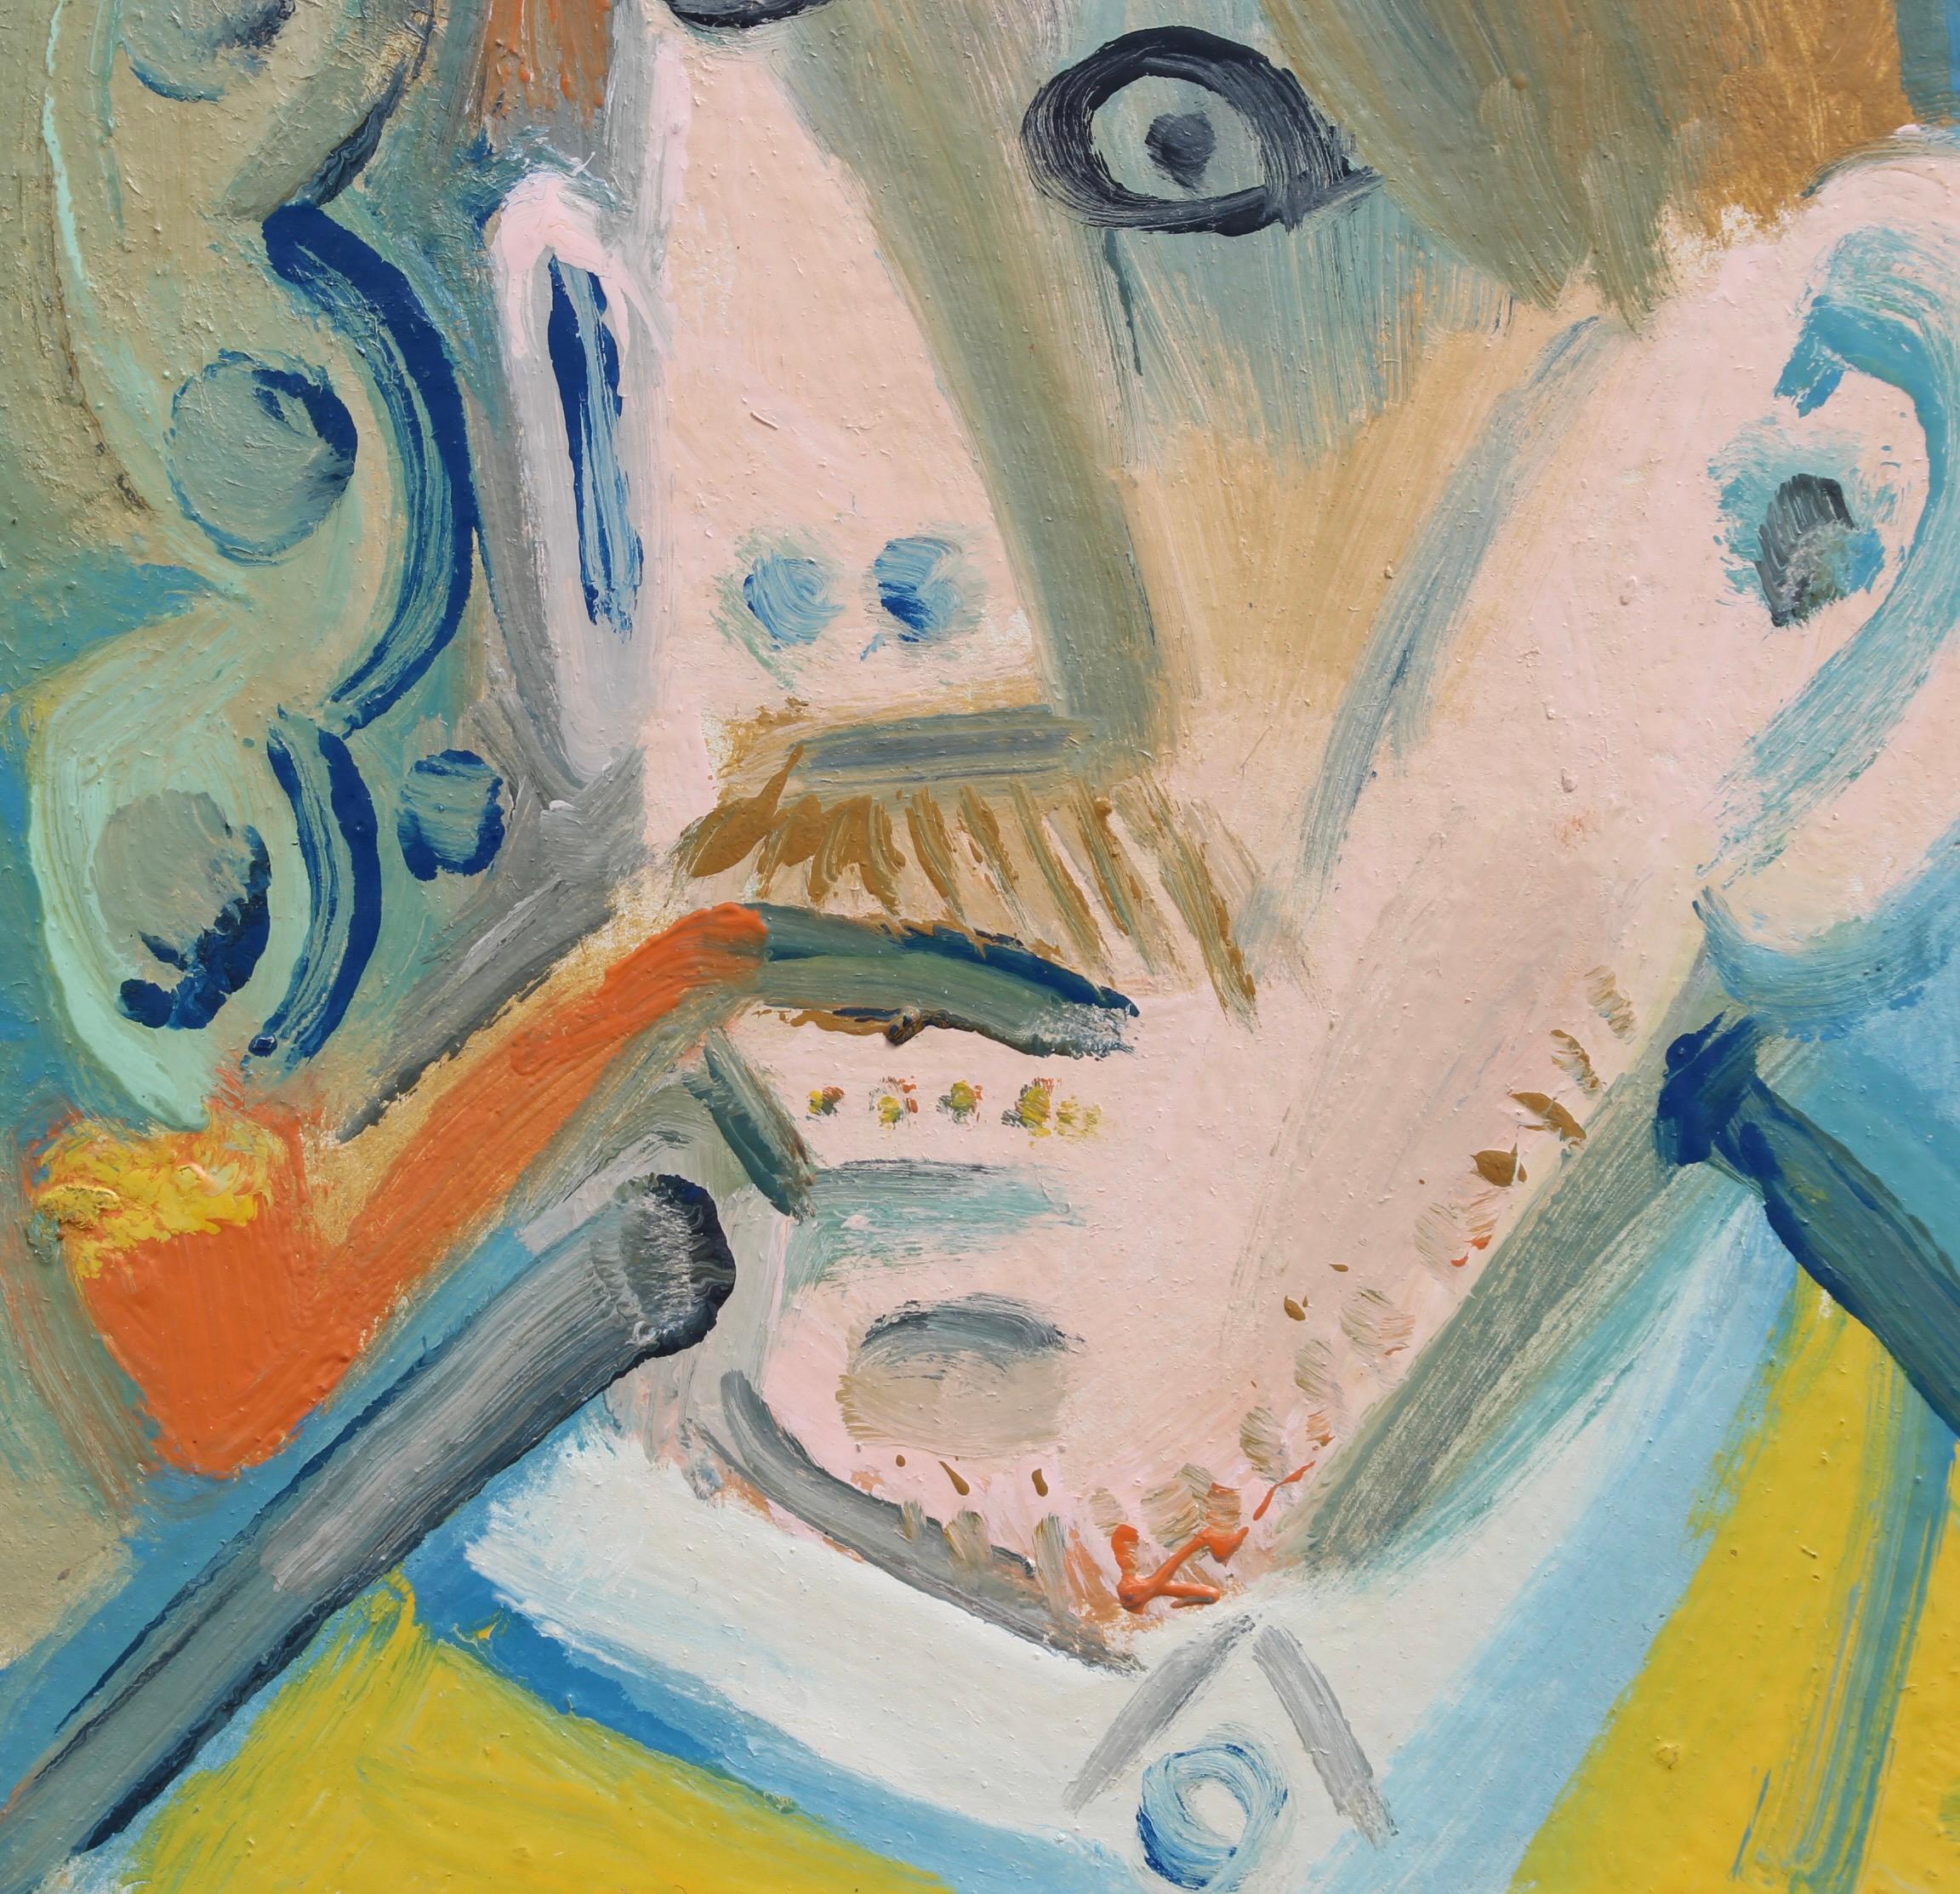 'Man Smoking a Pipe', oil on carton (circa 1960s), by Raymond Debiève. The artist depicts a moustached man puffing on his pipe in his post-cubist style. The identity of the subject is unknown. Picasso's influence is undeniable yet Debiève's own